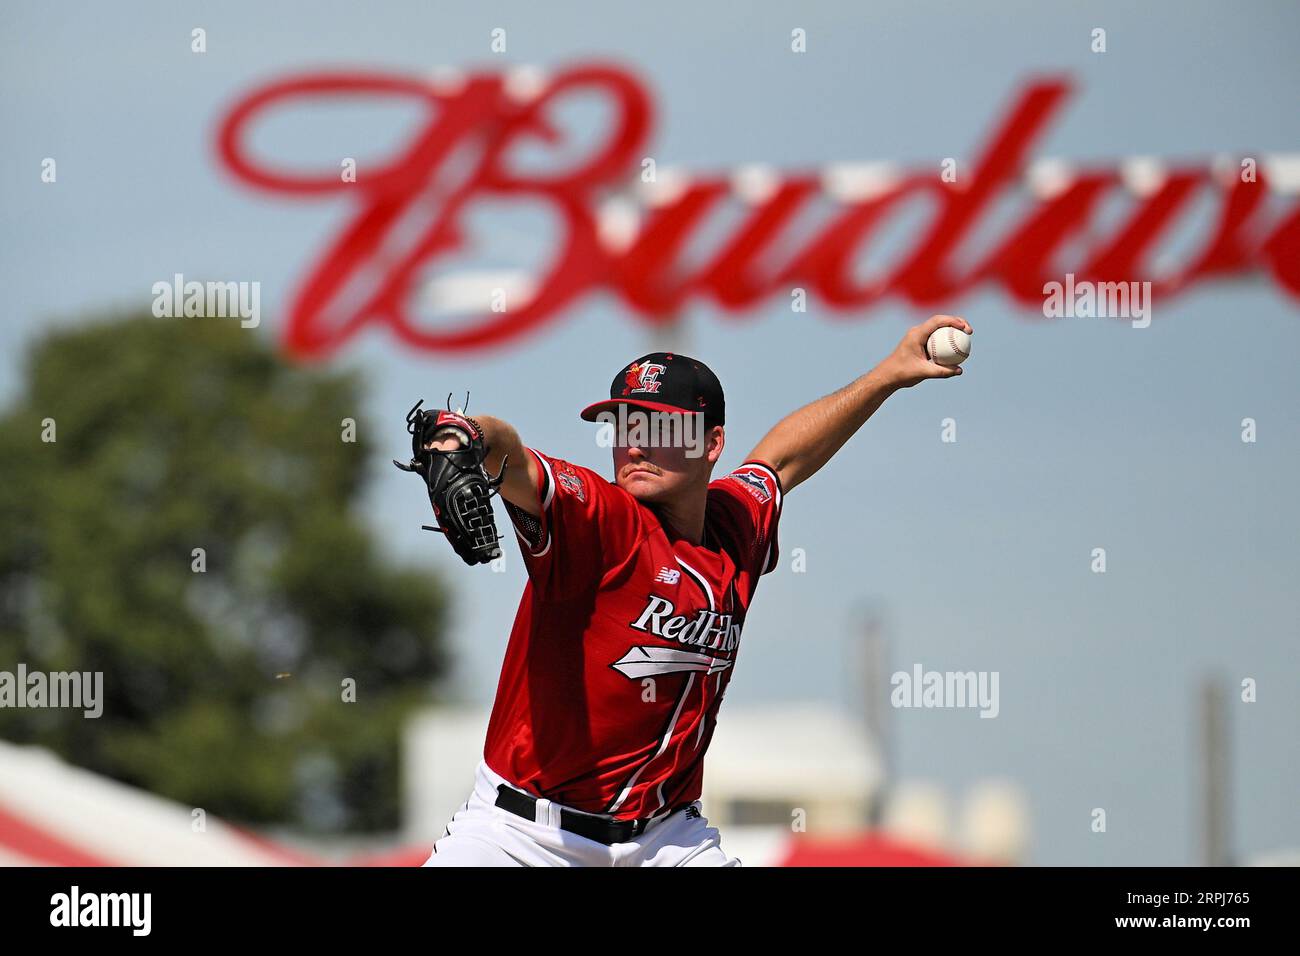 FM RedHawks pitcher Trey Cumbie (29) delivers a pitch during the FM Redhawks game against the Winnipeg Goldeyes in American Association professional baseball at Newman Outdoor Field in Fargo, ND on Sunday, September 4, 2023. Winnipeg won 7-2. Photo by Russell Hons/CSM. Stock Photo